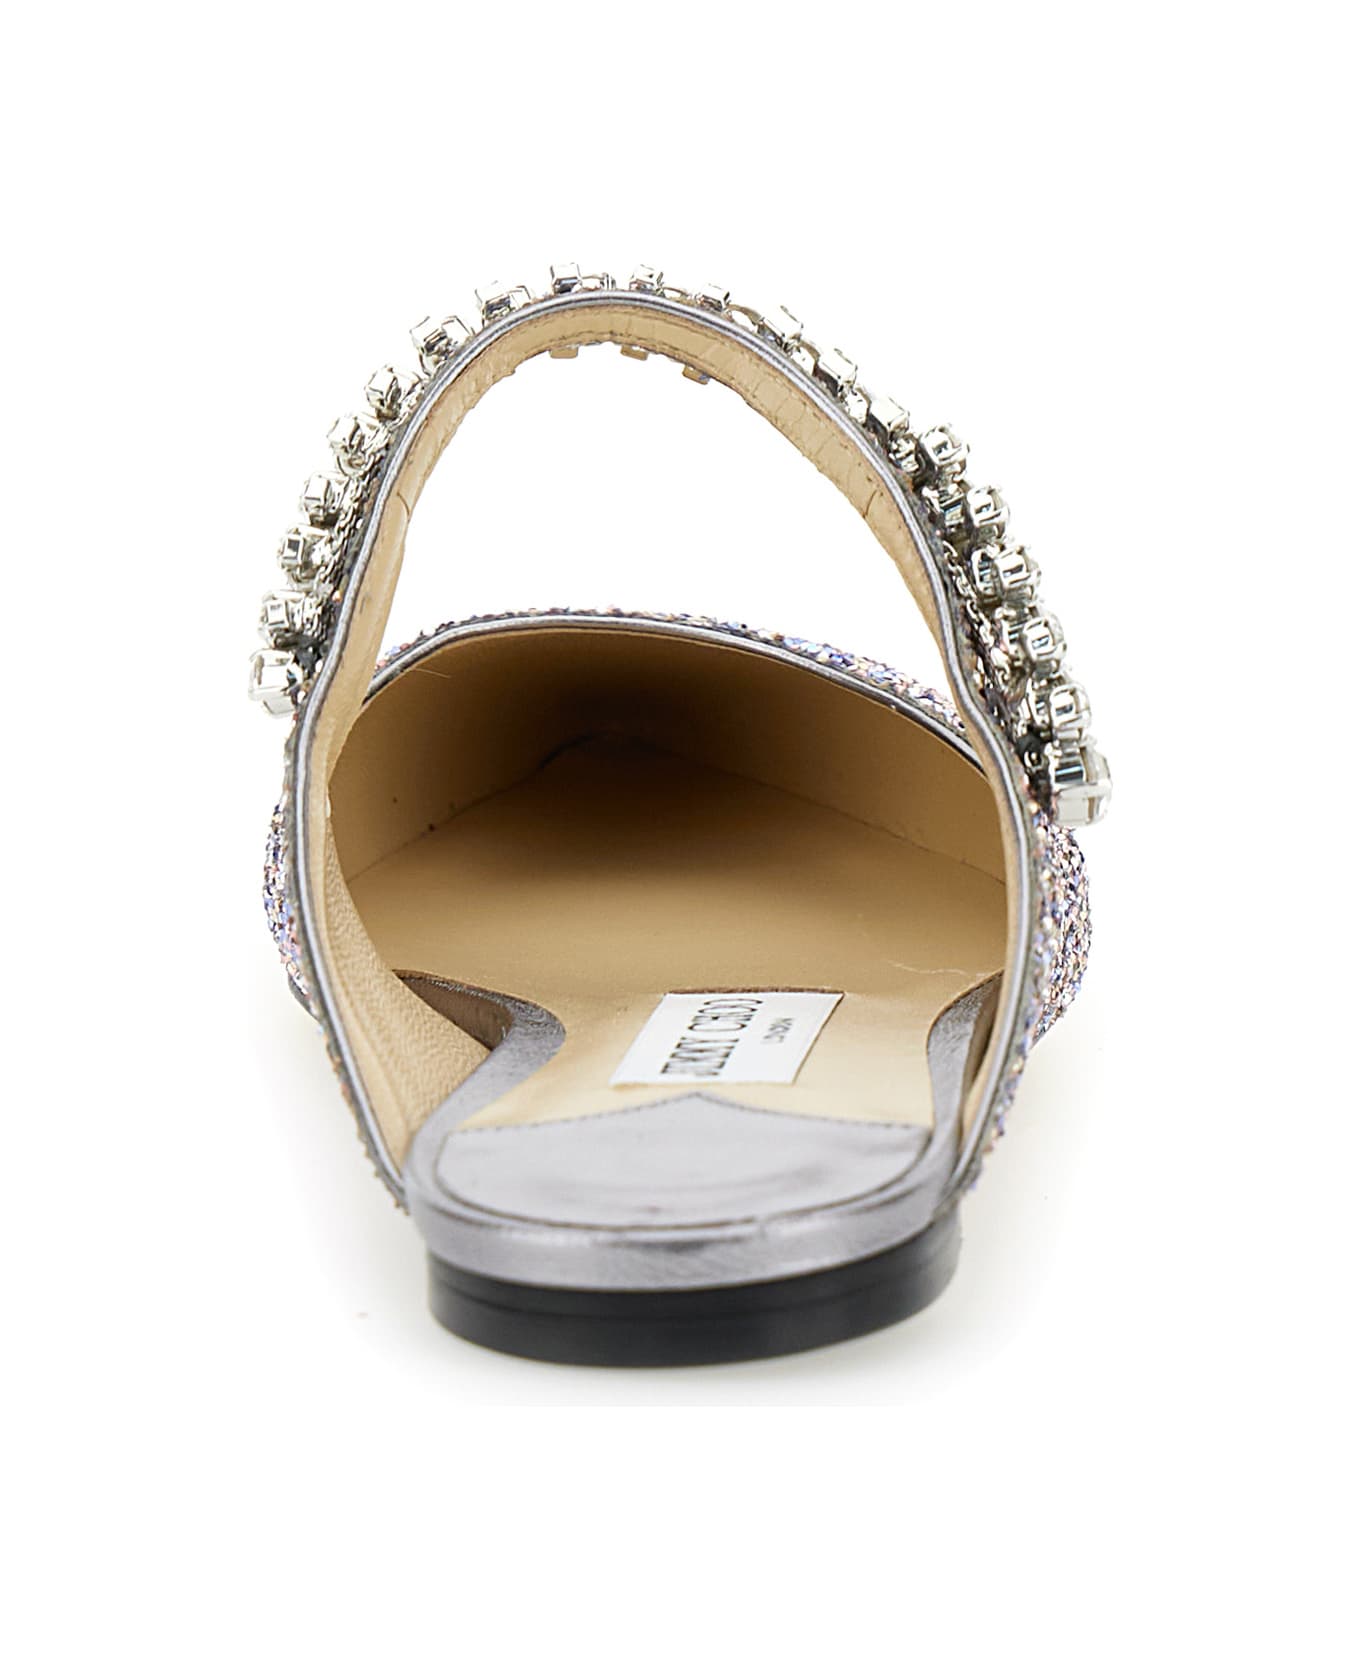 Jimmy Choo 'bling Flat' Multicolor Mules With Crystal Strap In Glitter Fabric Woman - Metallic フラットシューズ